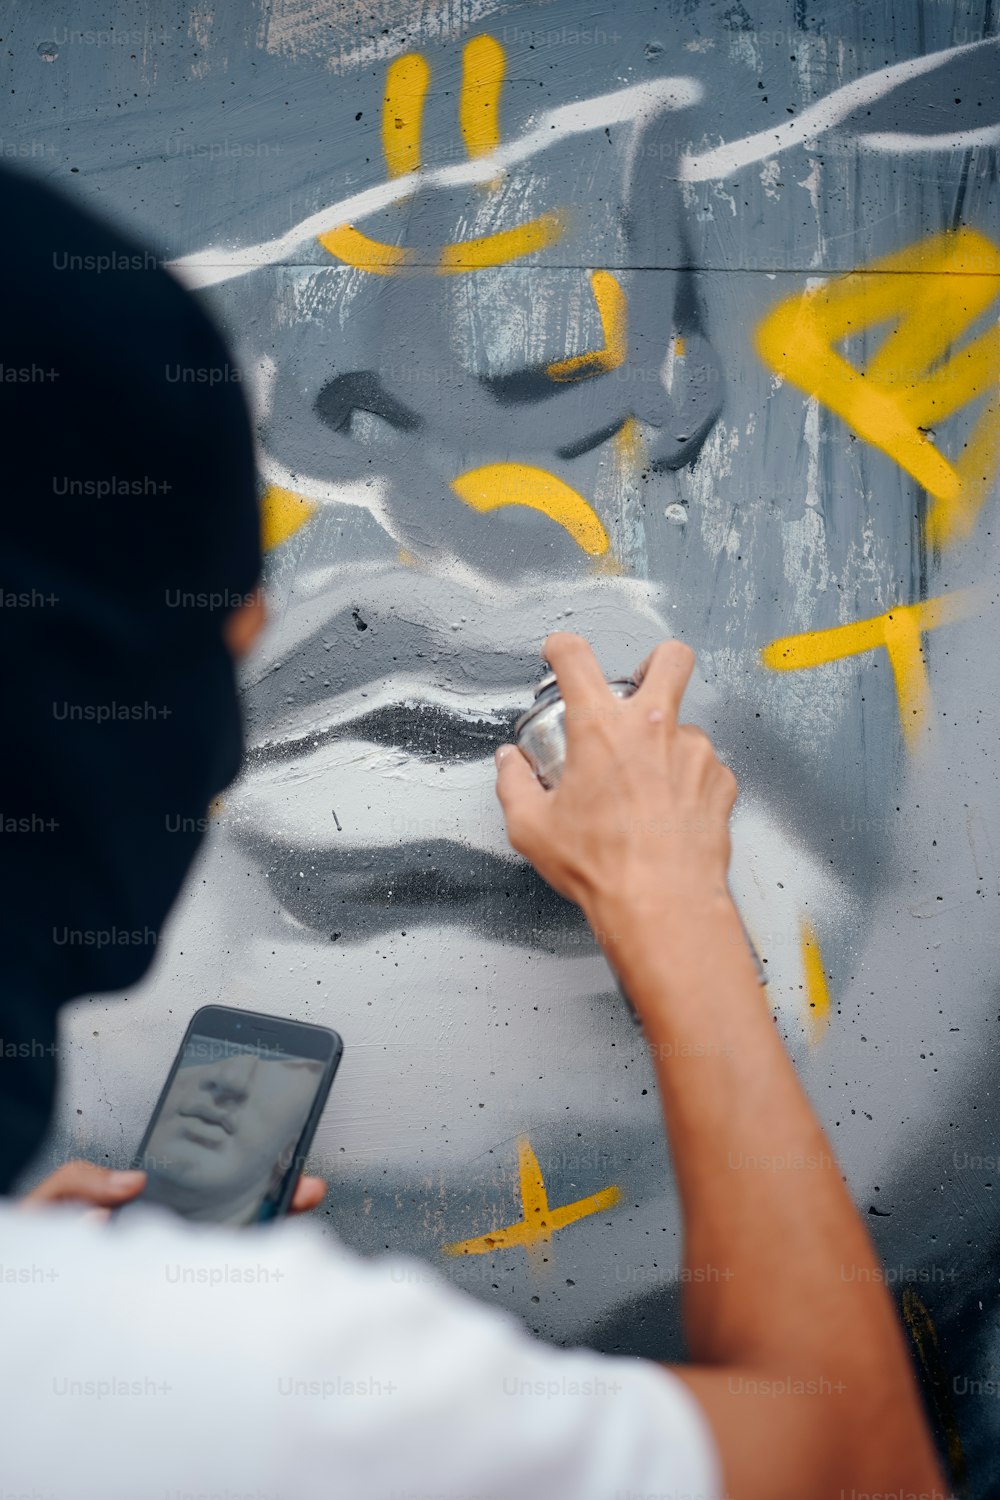 a man writing on a wall with a cell phone